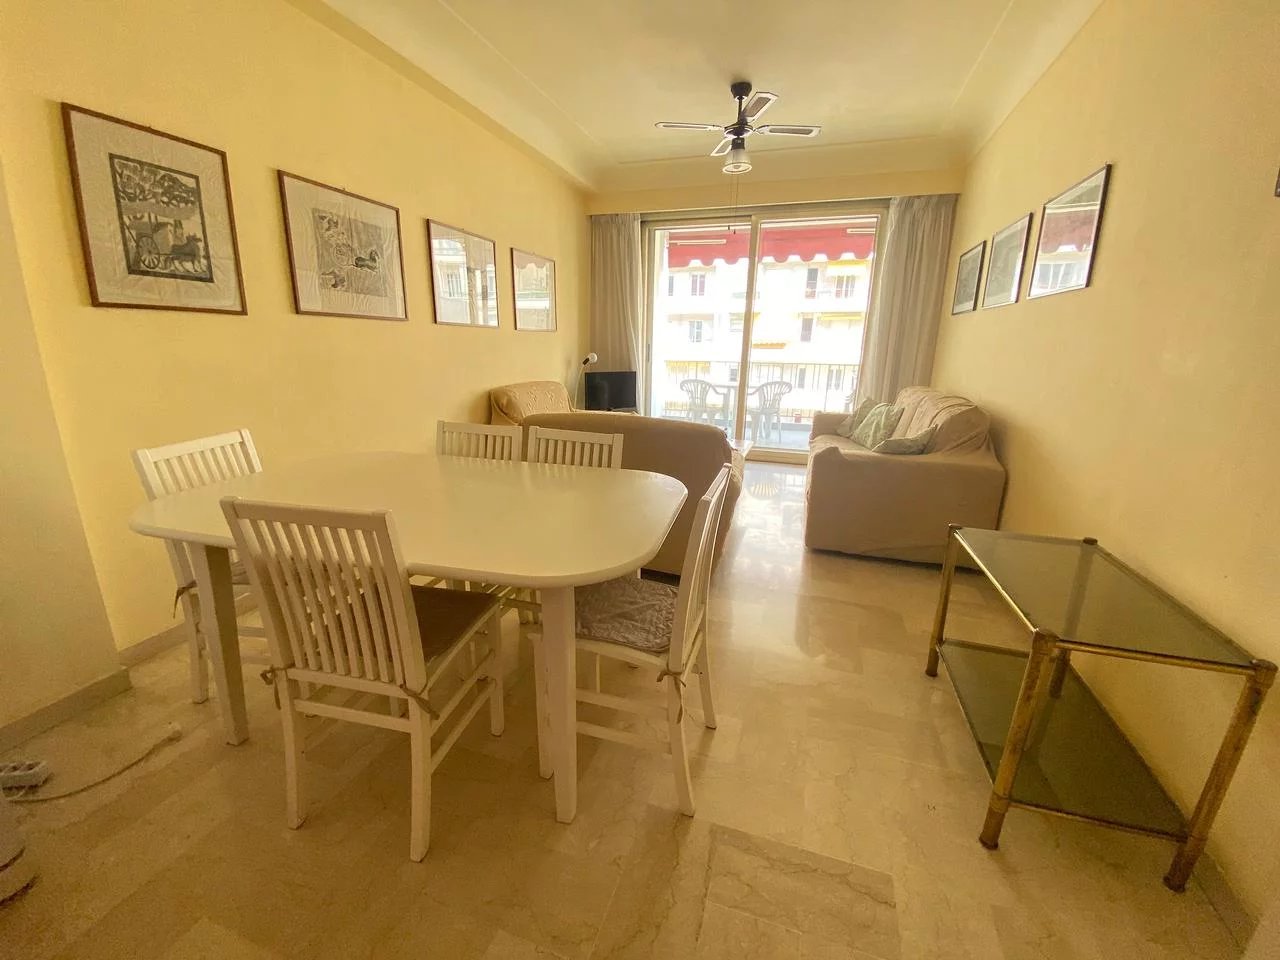 Appartement  3 Rooms 62.4m2  for sale   320 000 €